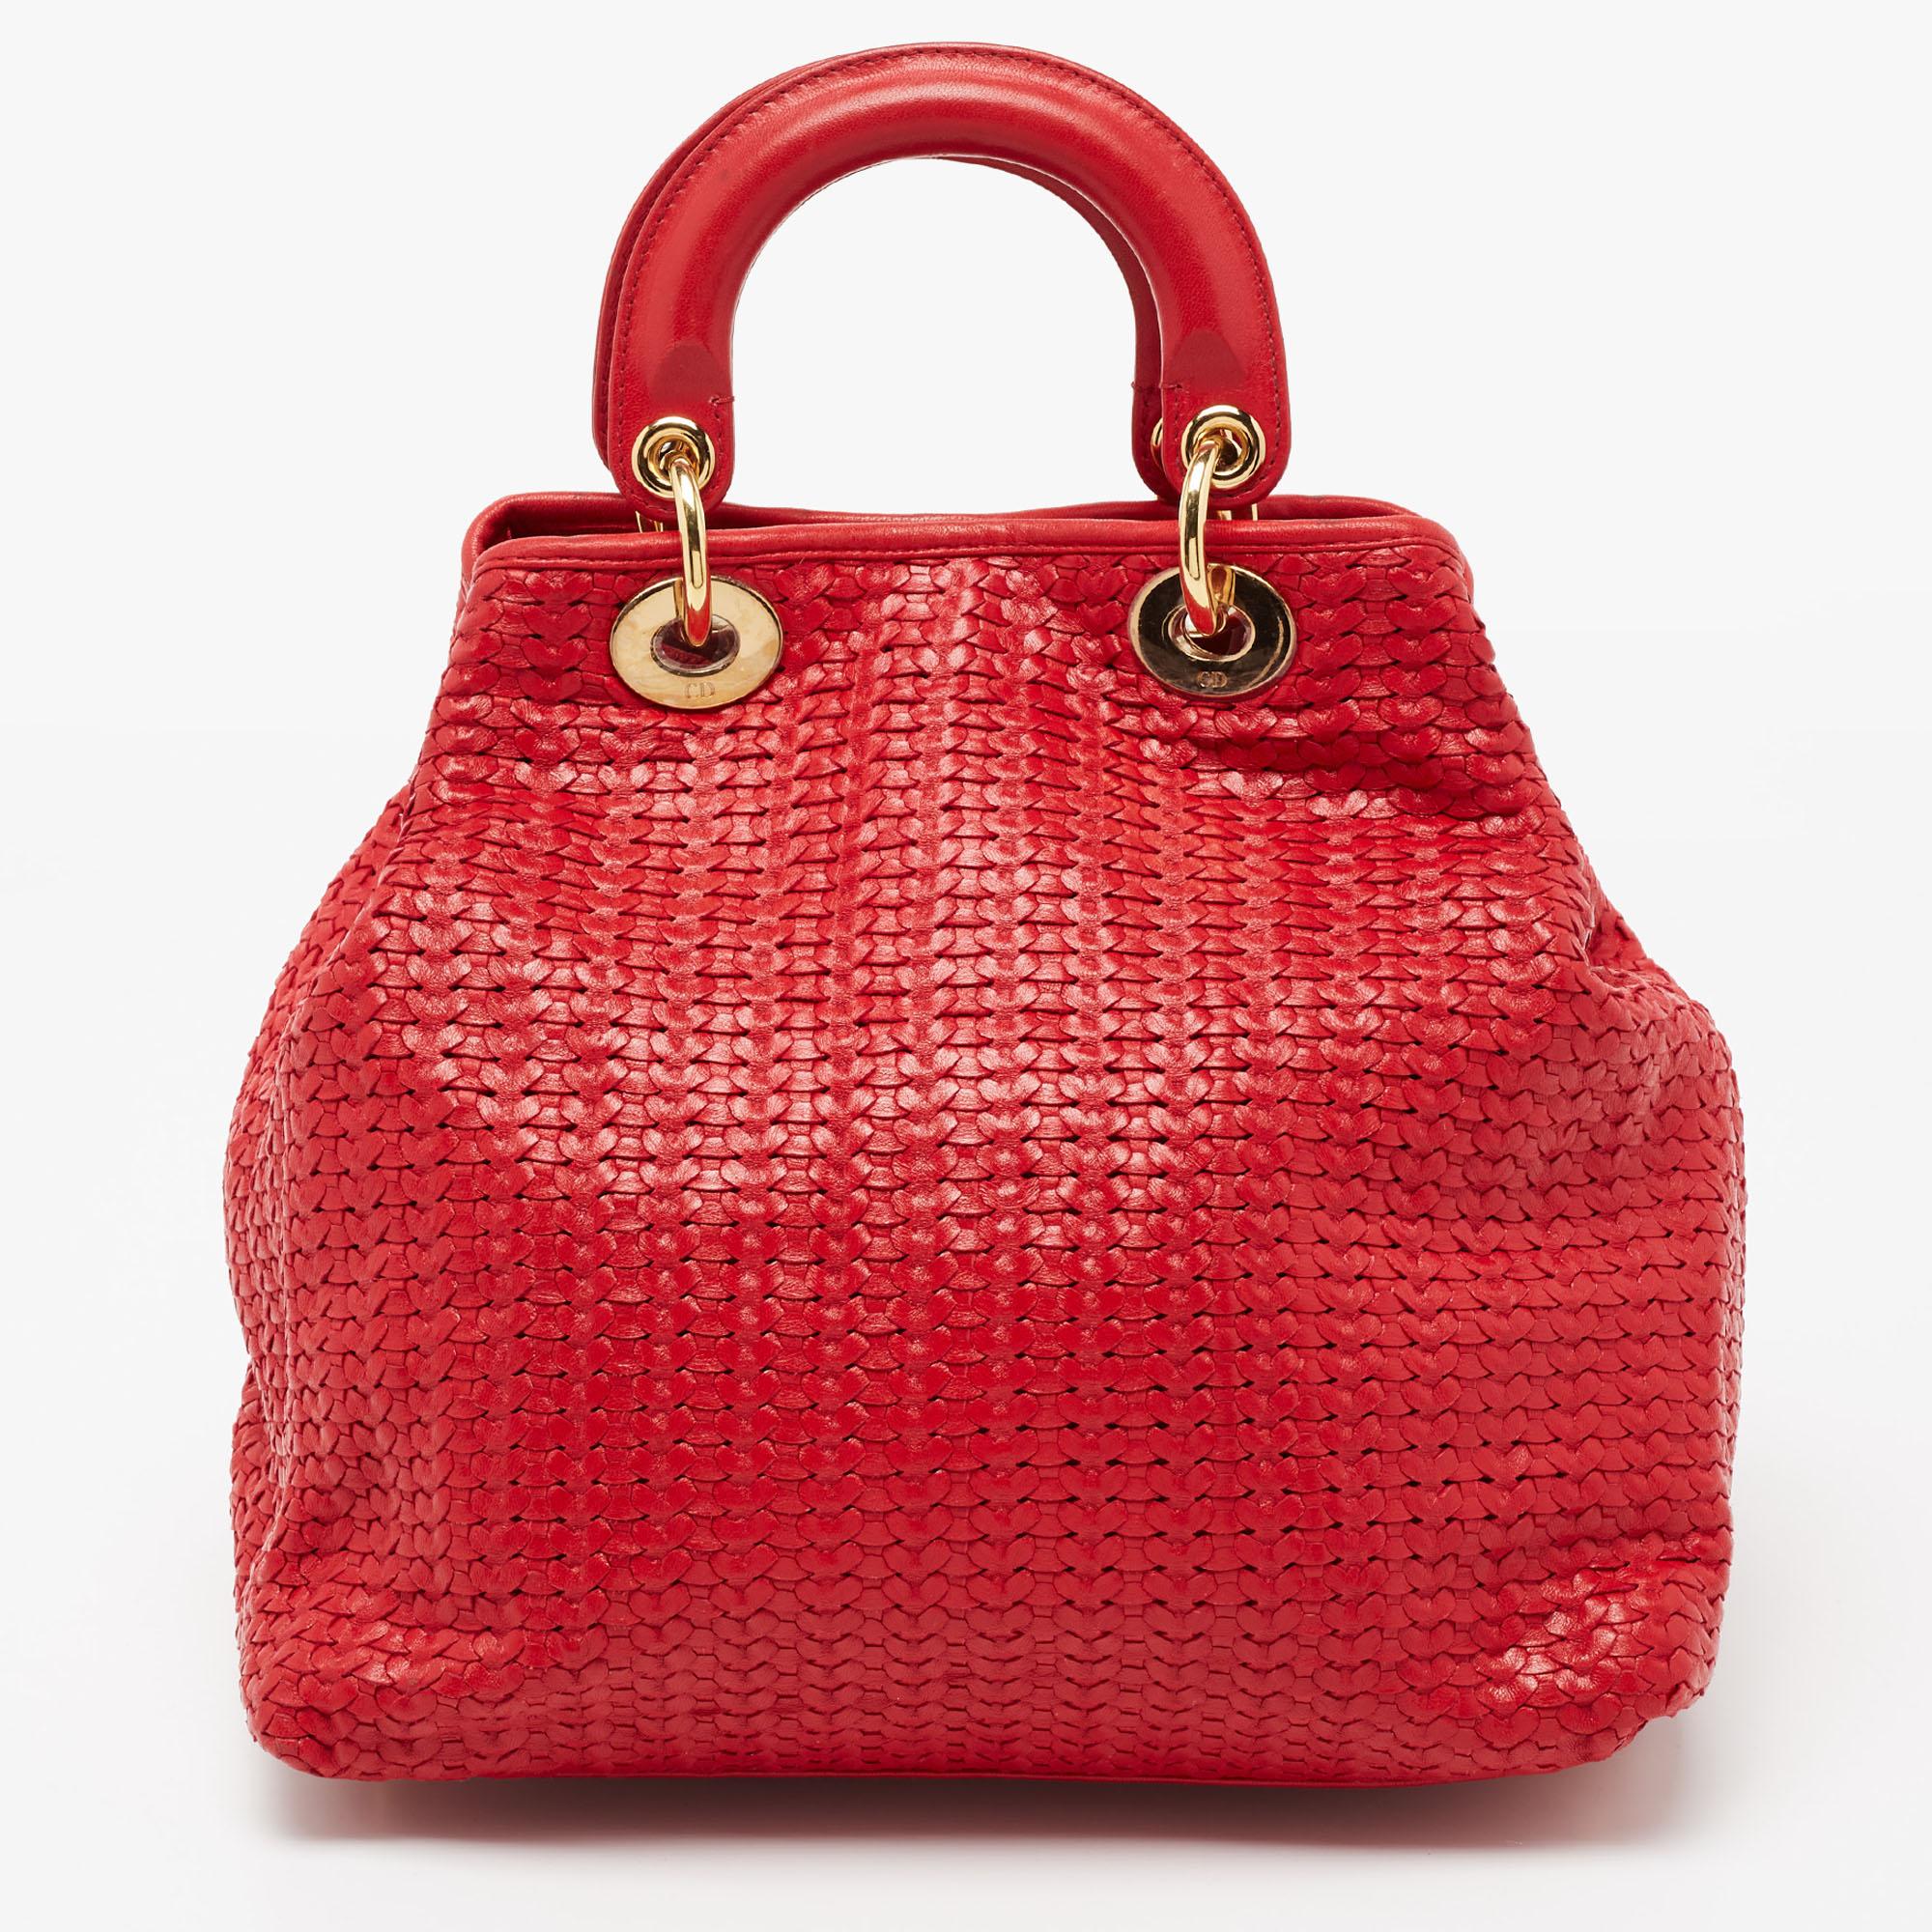 This pre-owned Dior tote is a timeless piece that can last you season after season. This bag is made of woven leather and will effortlessly accompany you to work and after. It has a red shade, brand charms, dual handles, and a suede interior.

